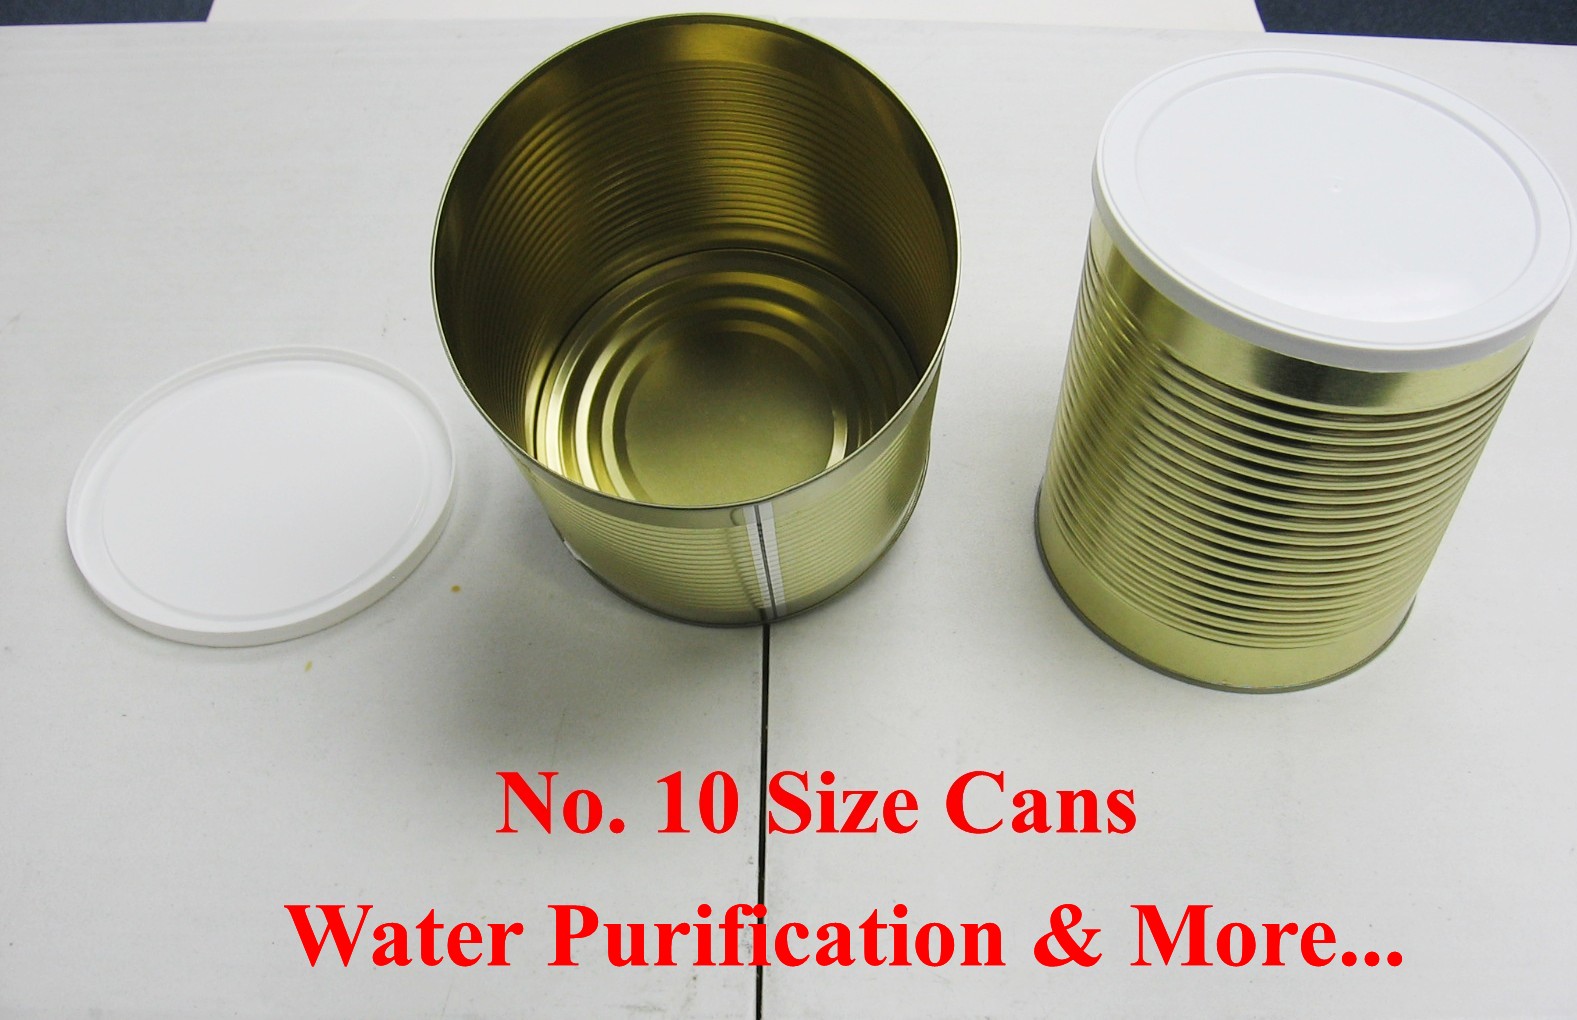 No. 10 Cans With Lid